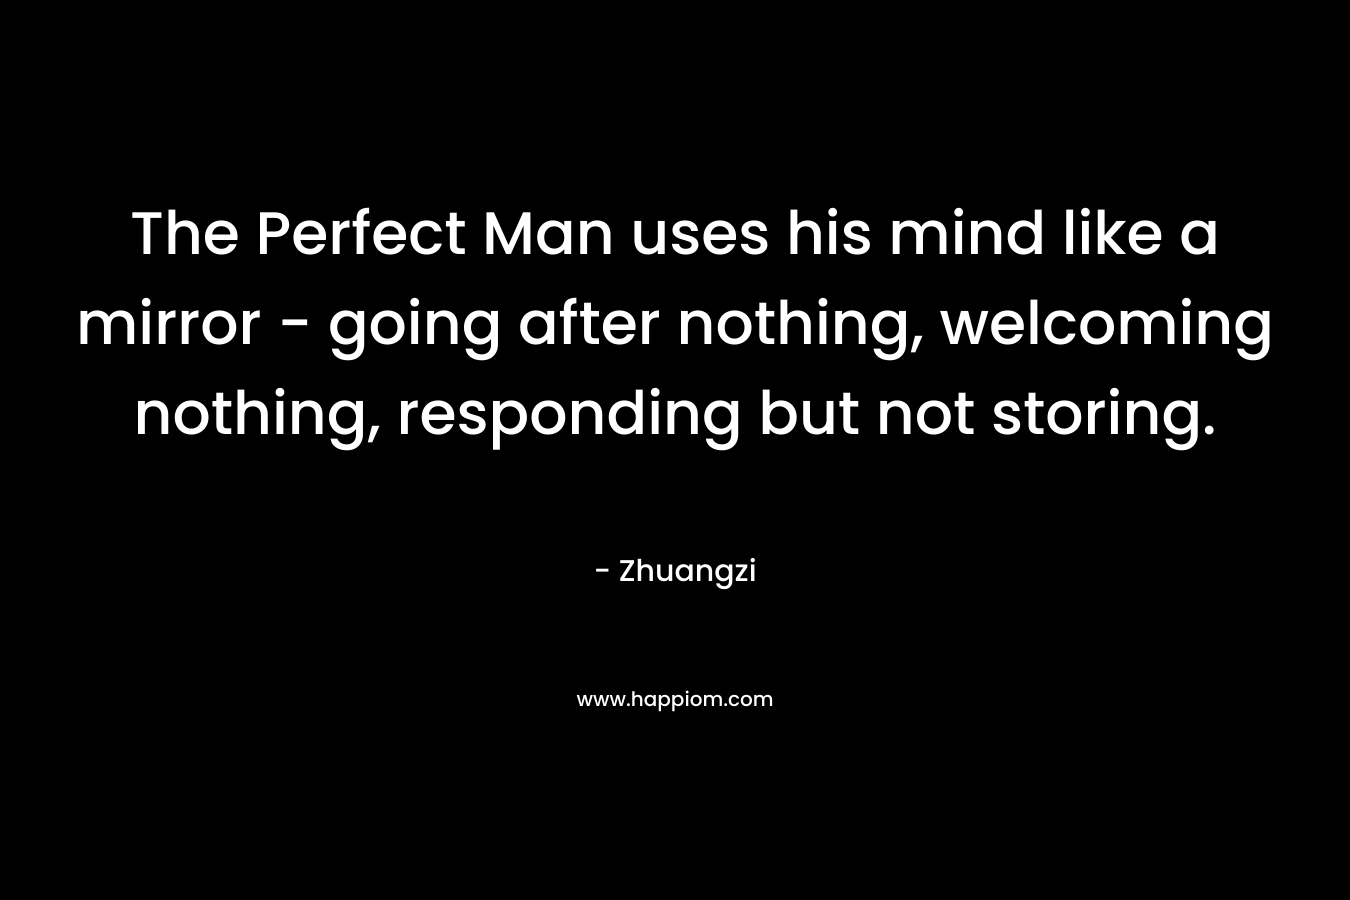 The Perfect Man uses his mind like a mirror – going after nothing, welcoming nothing, responding but not storing. – Zhuangzi